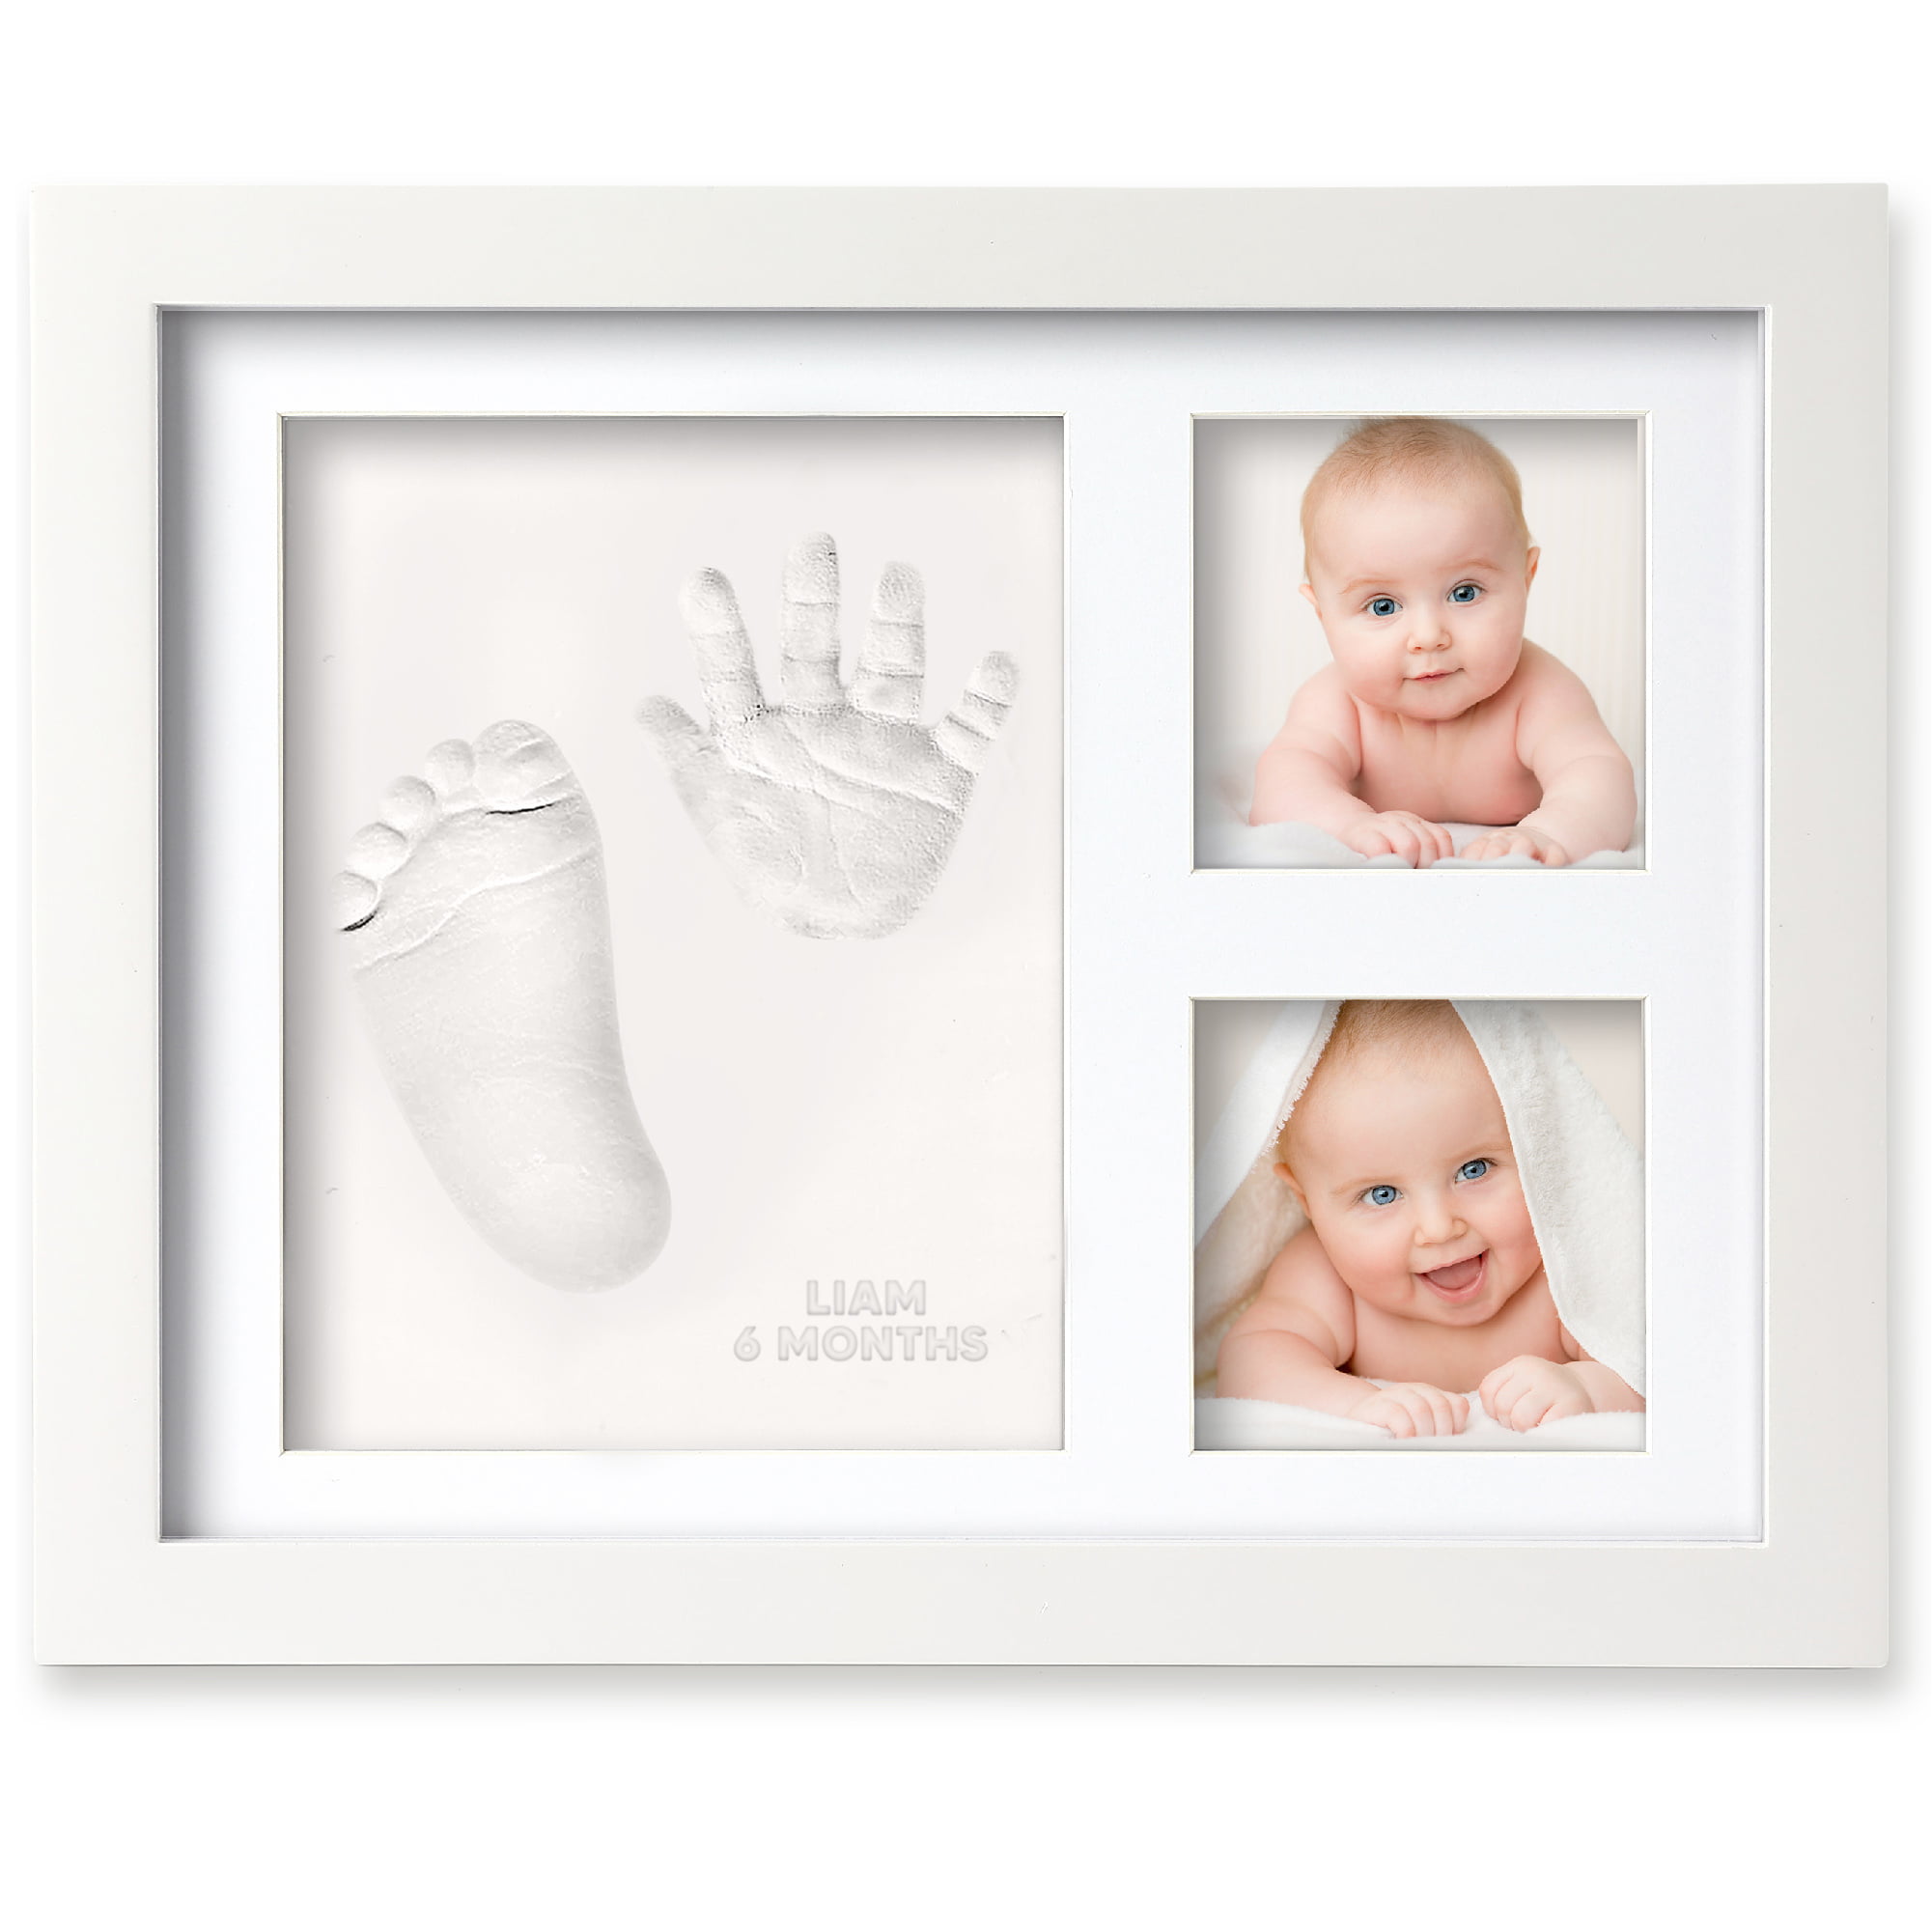 Baby Print Kit Wooden Pack capture baby‘s hand and footprints with photo Gift2 